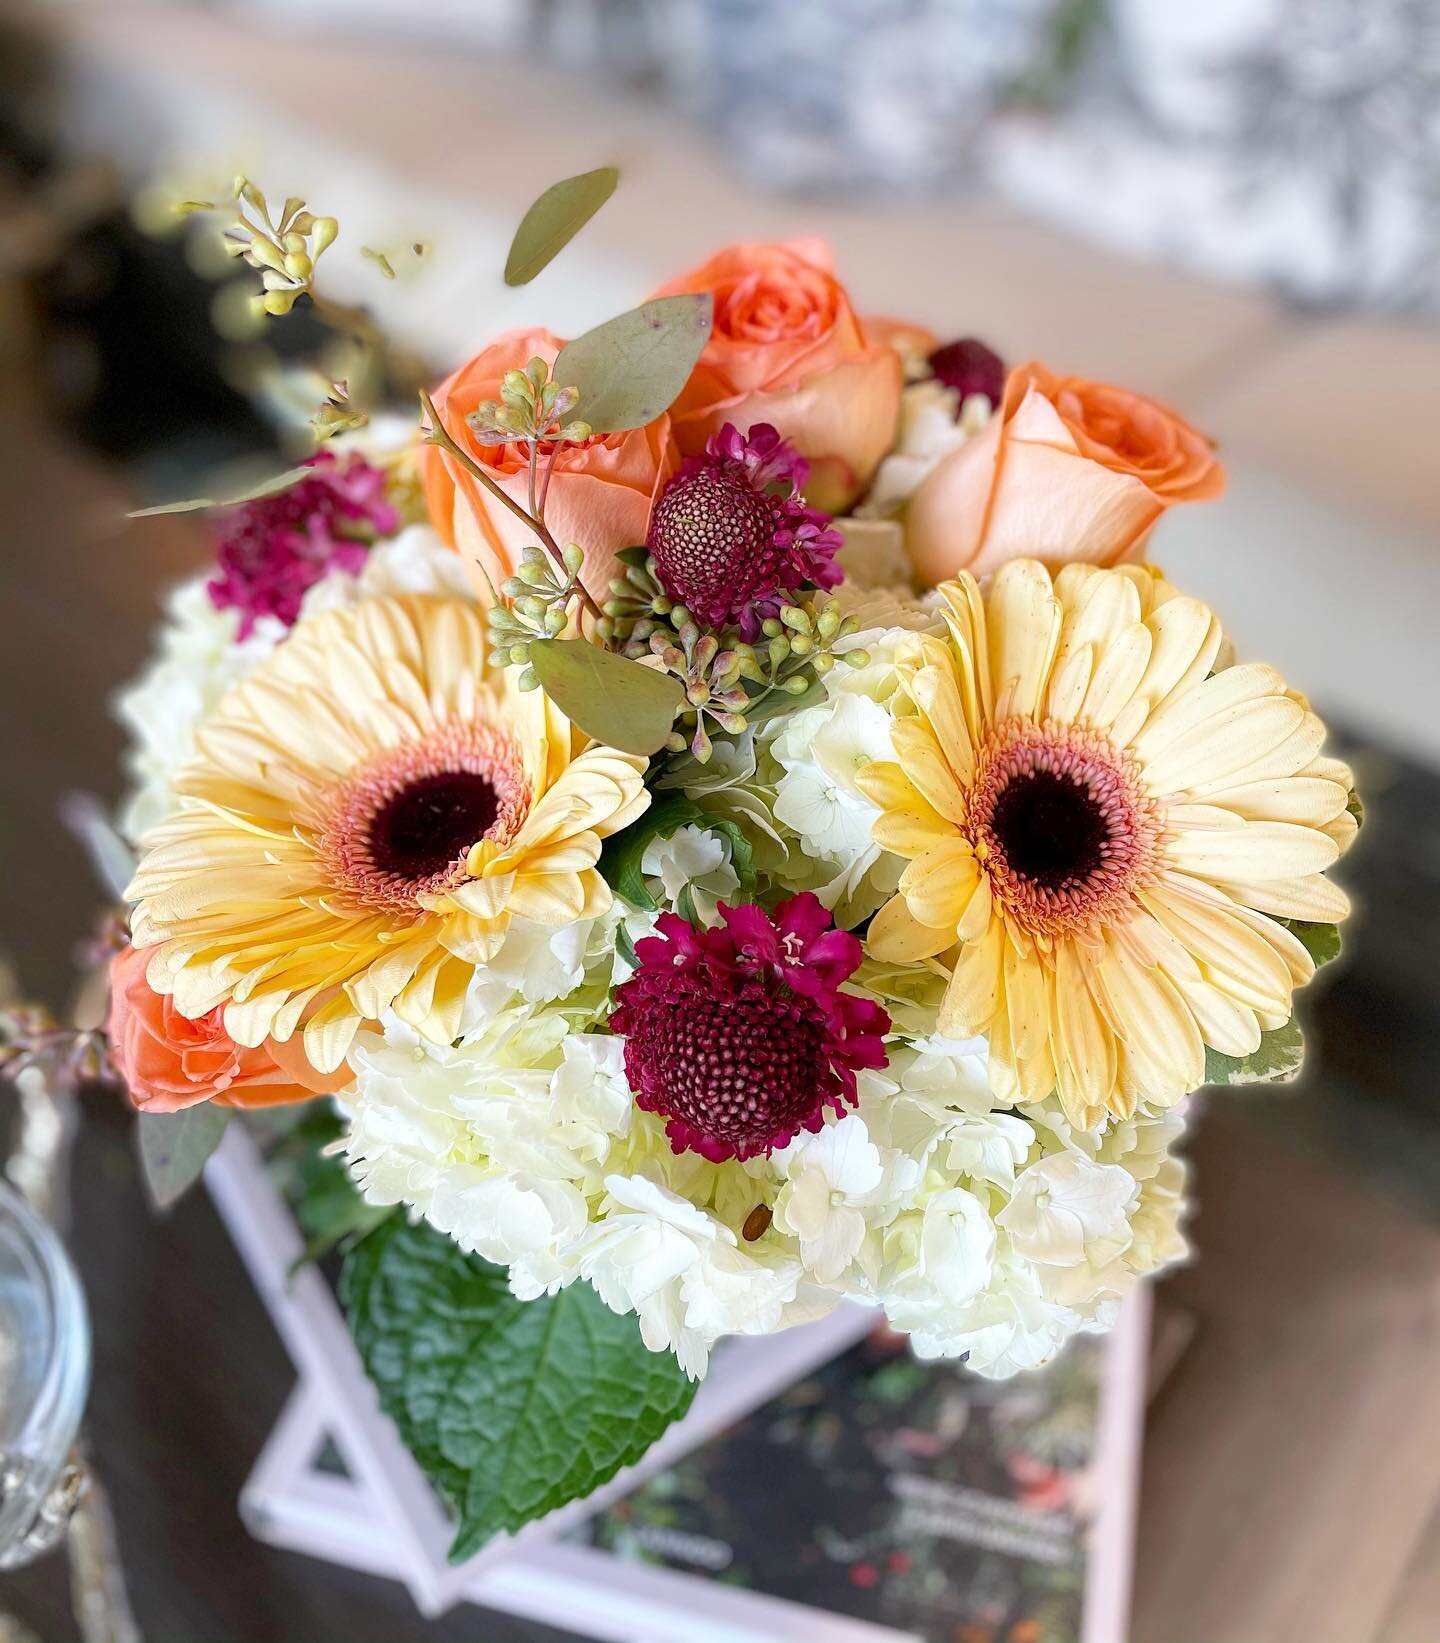 Happy florals to start off your week!🌼I&rsquo;m excited to create with fresh and bright Spring colors &mdash; and I&rsquo;m also starting to prep and take orders for Easter.🐰Call 432-682-8533 to place an order Easter or send flowers out to brighten